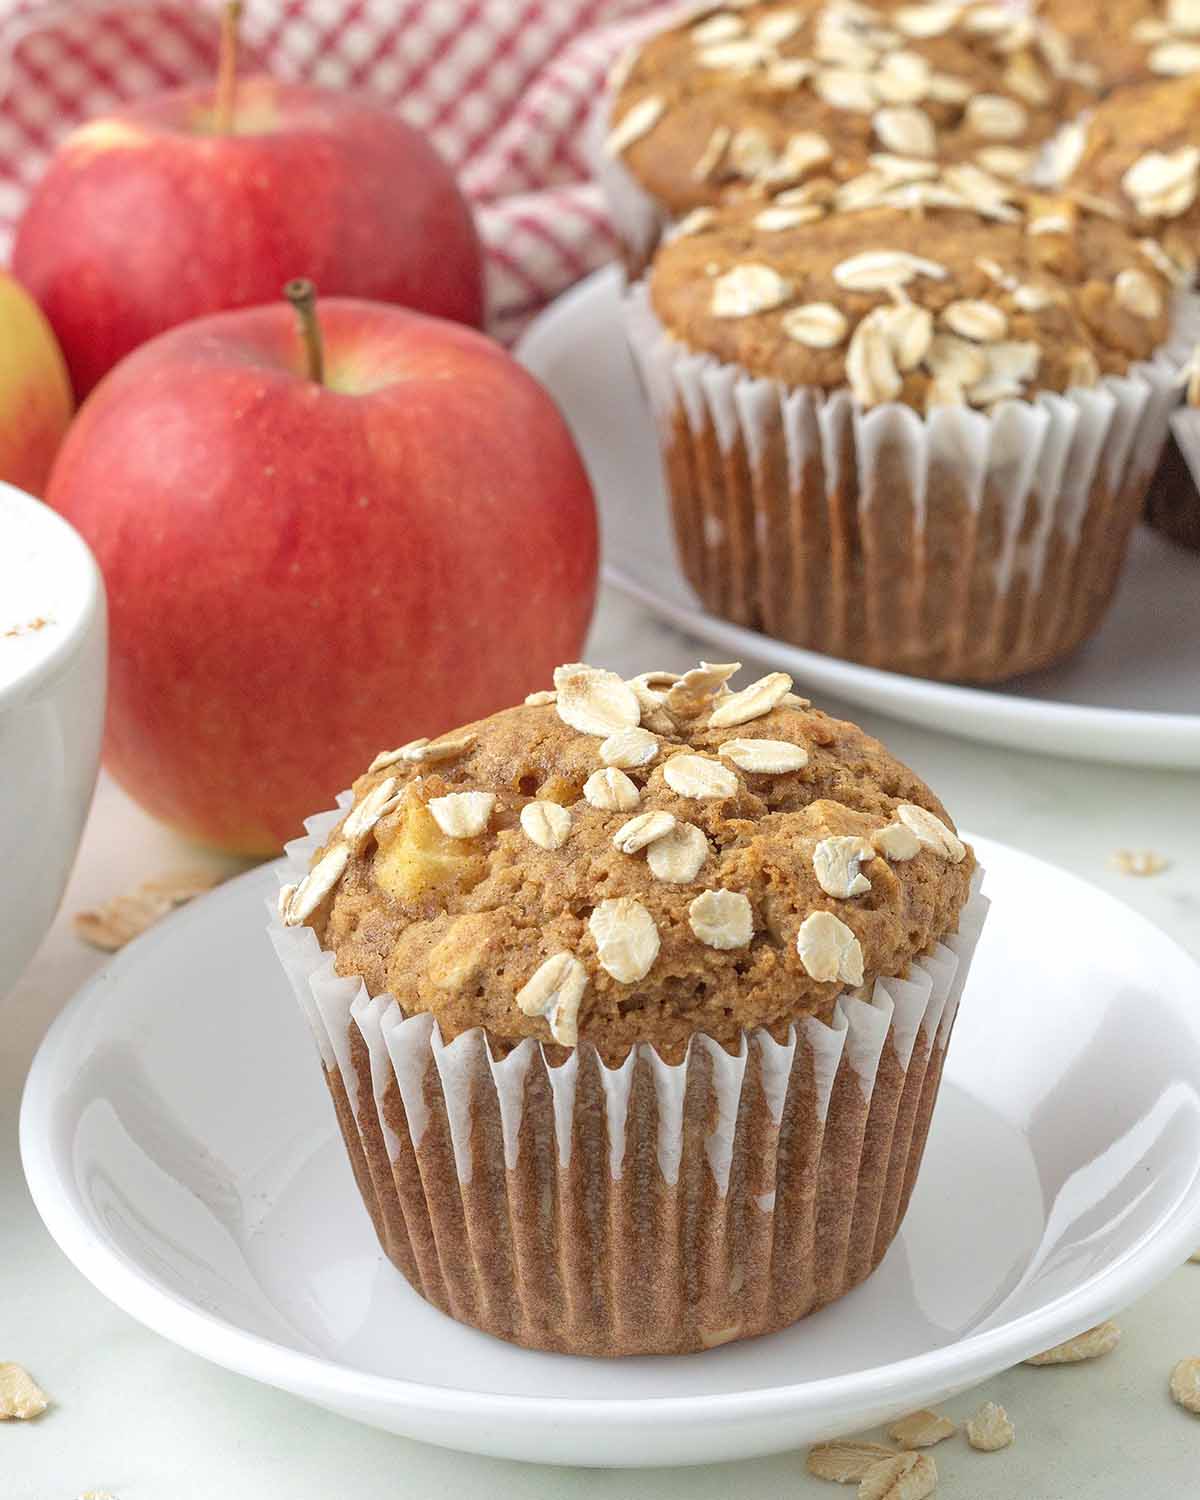 An apple oatmeal muffin on a small white plate.